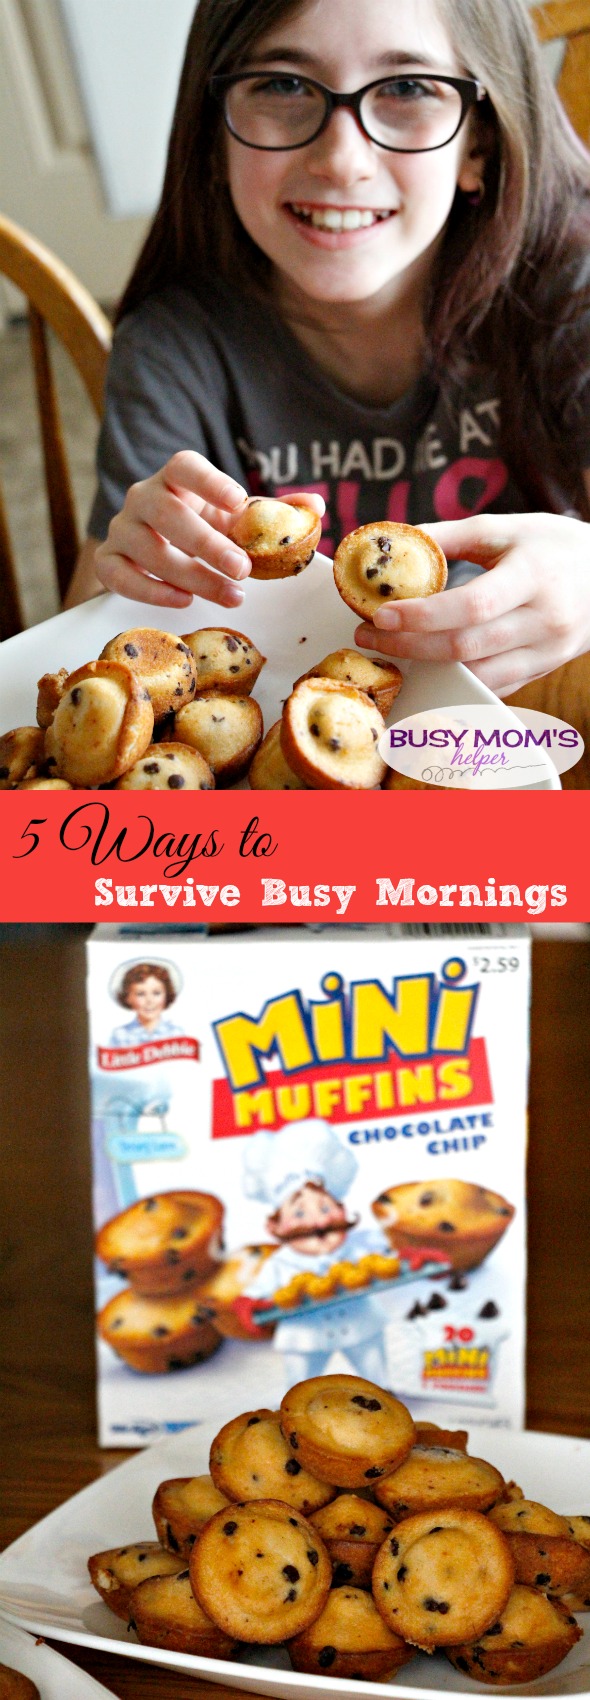 5 Ways to Survive Mornings / Busy Mornings #Momsof7AM #LittleDebbie #MiniMuffins #ad